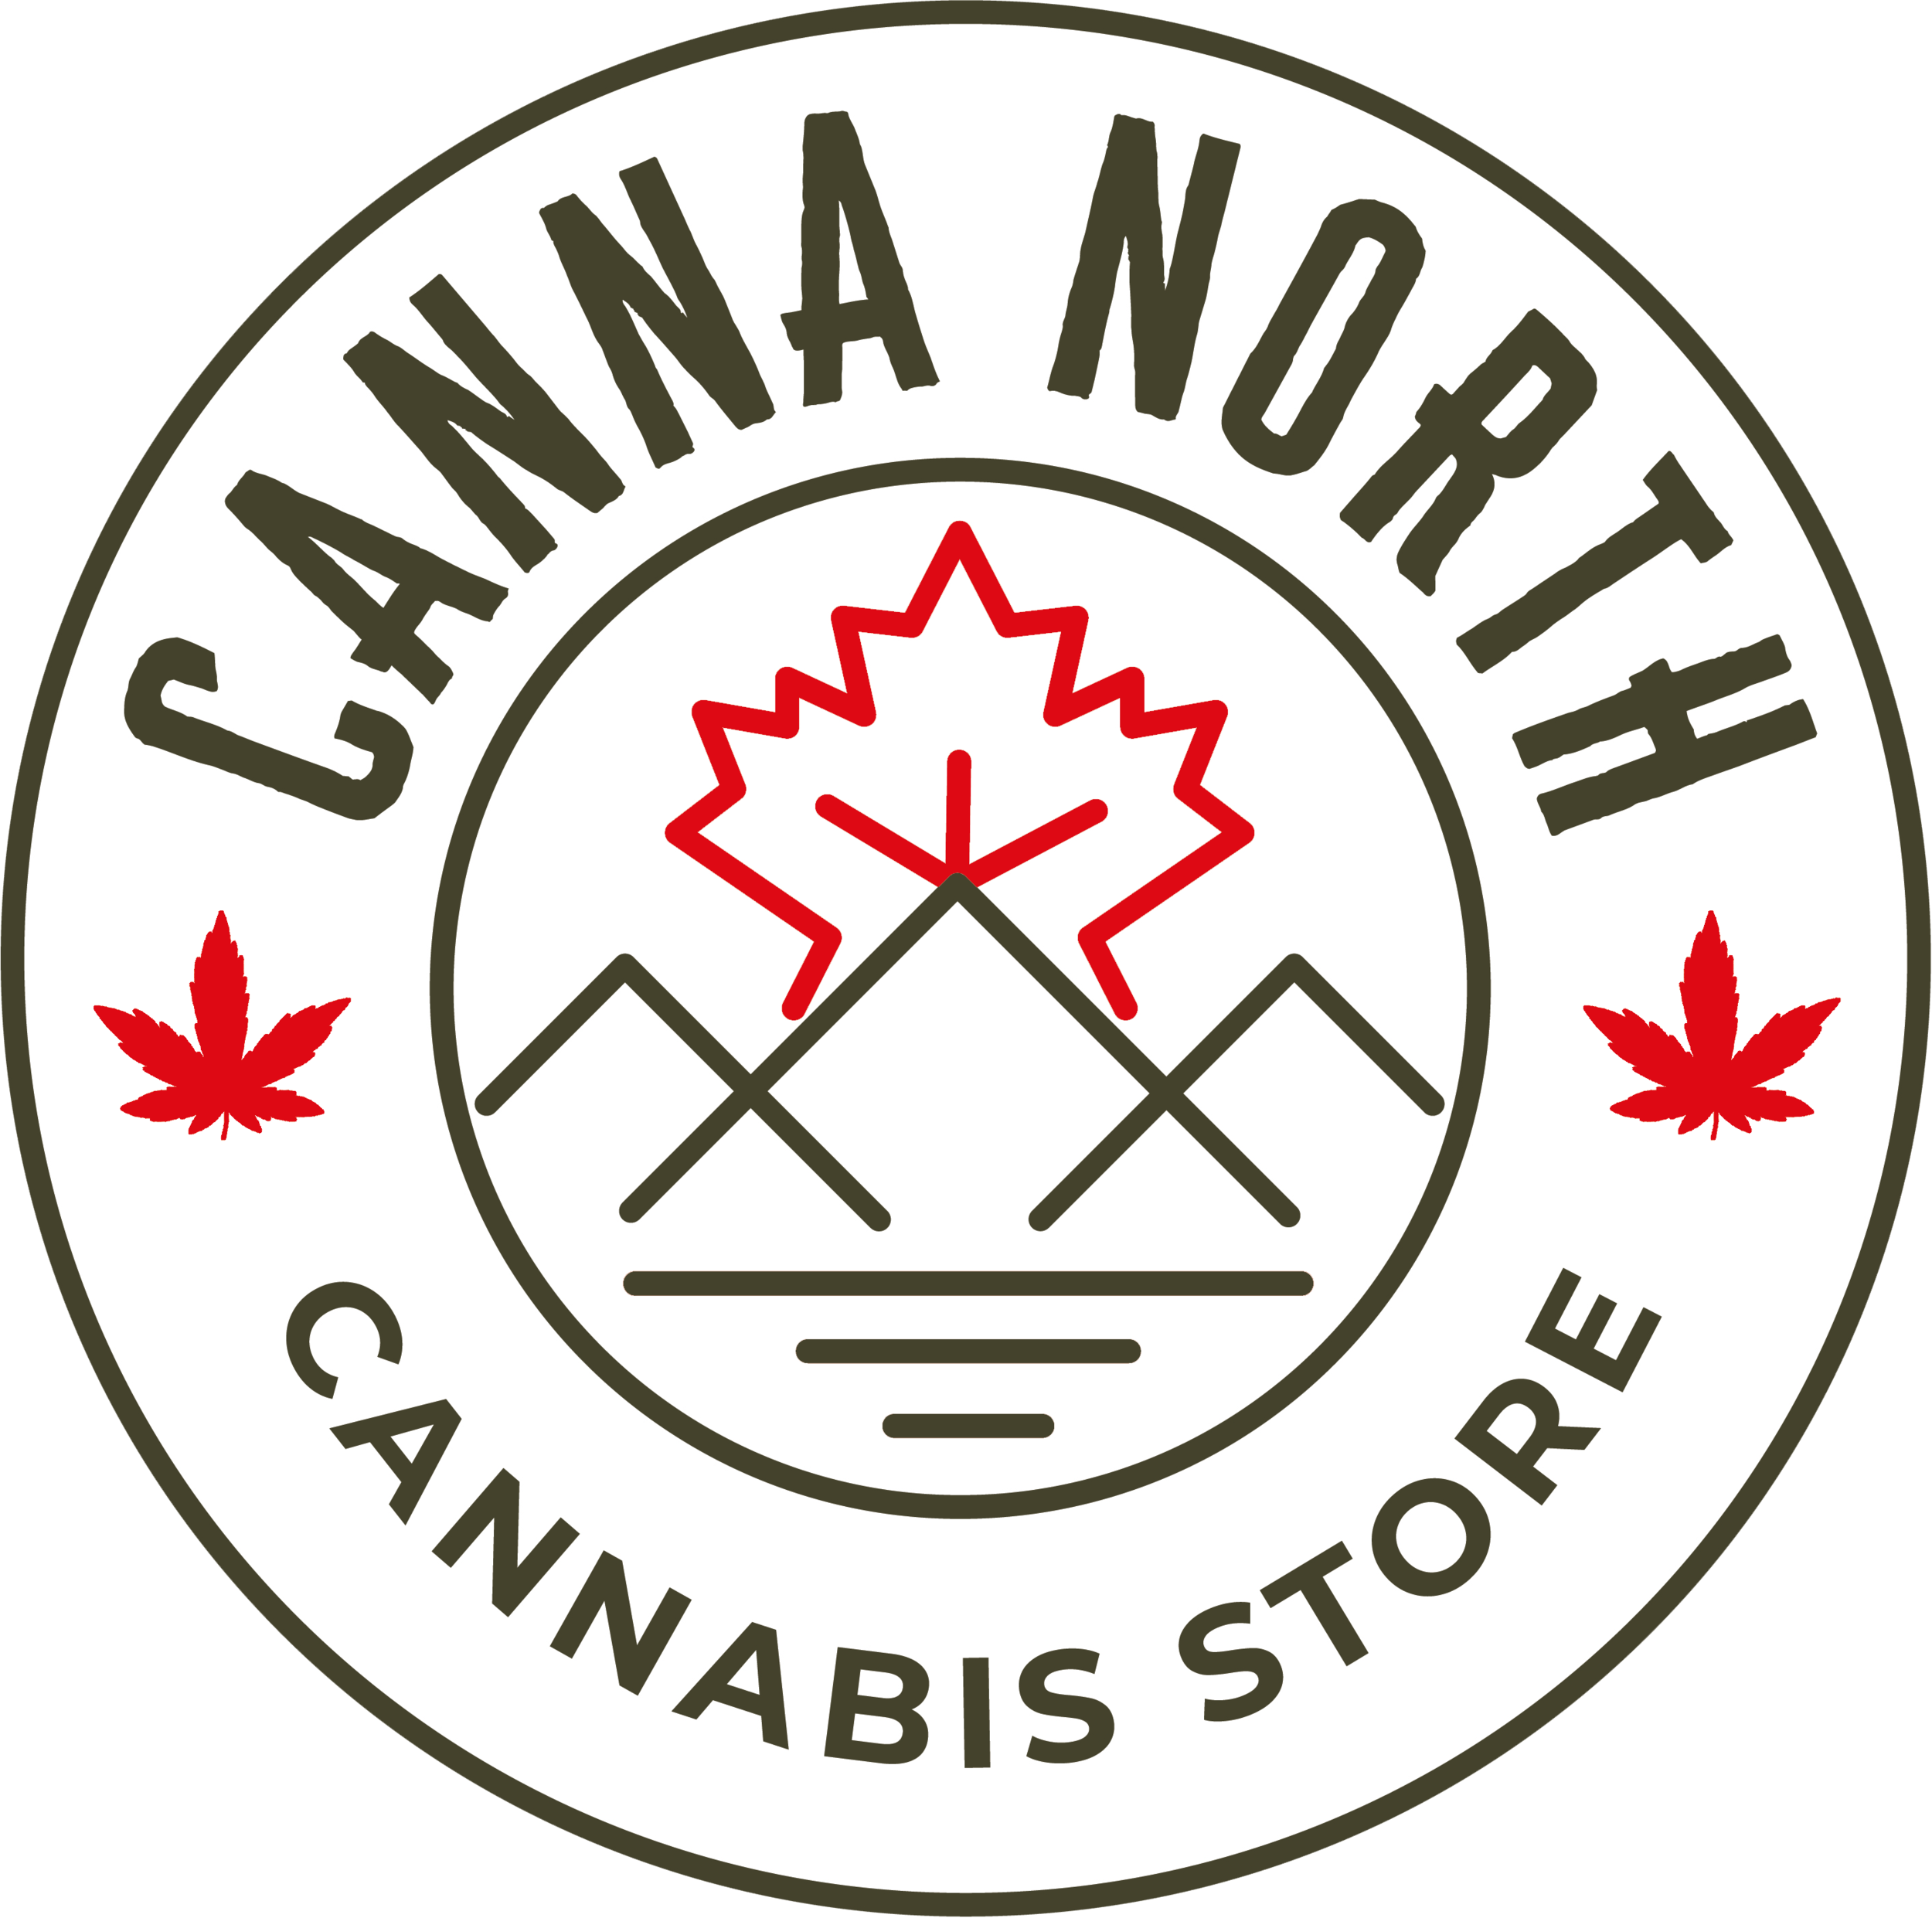 Canna North Cannabis Store | Local No Frill Cannabis Stores in Ottawa and Toronto